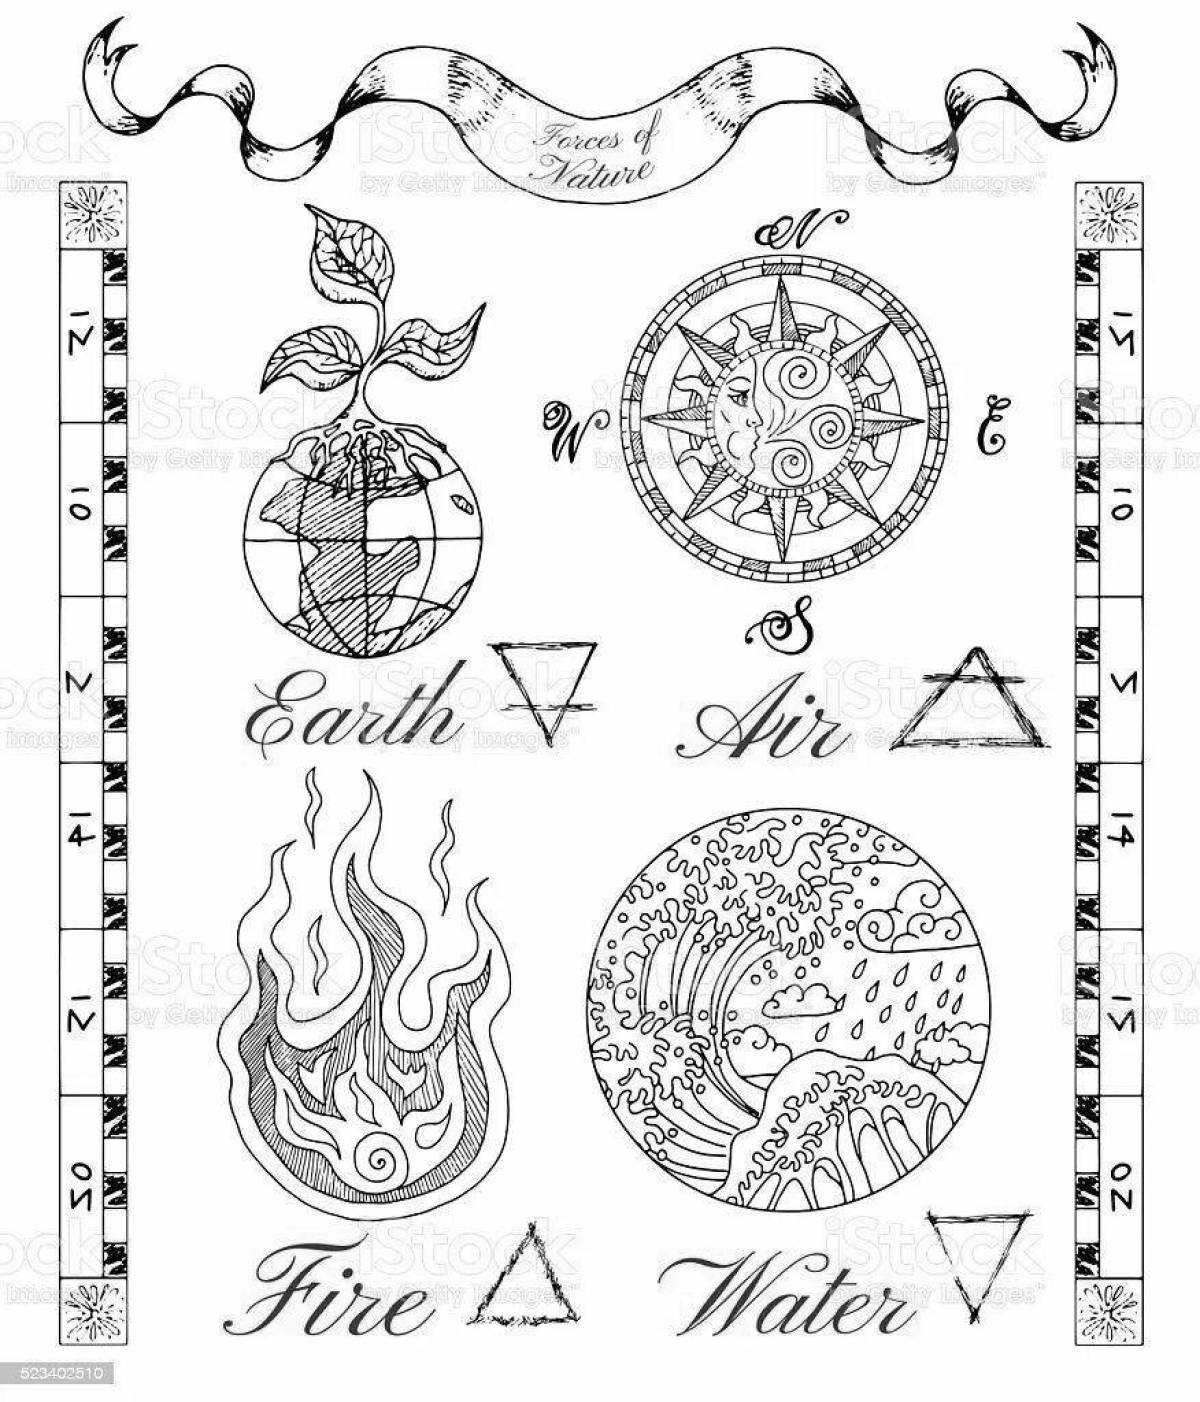 Distinctive elements of the coloring page